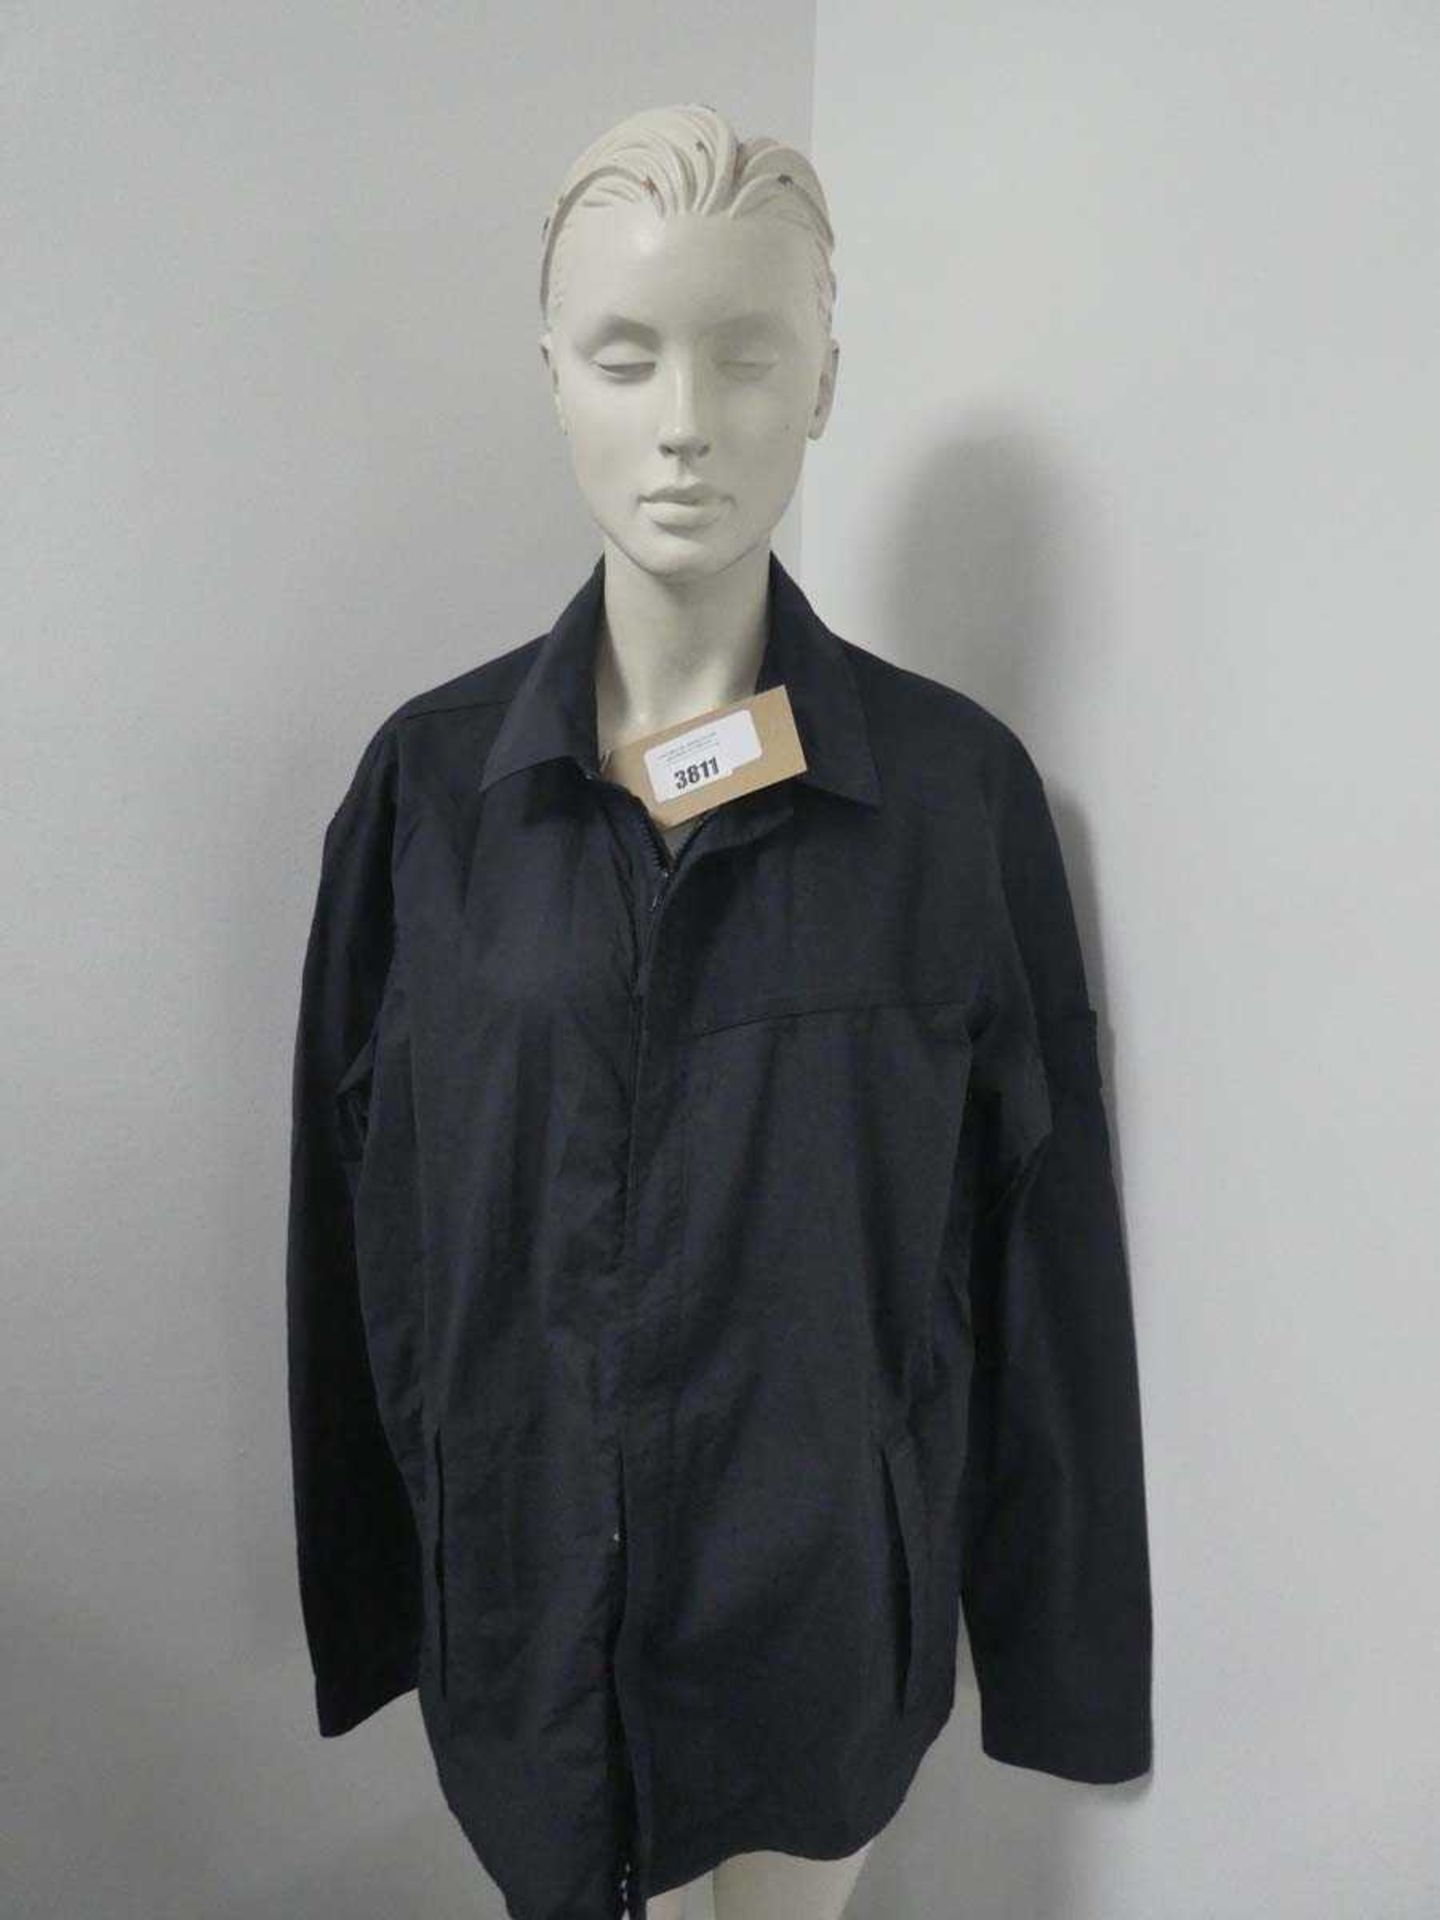 +VAT Stone Island zip jacket (some signs of use), size XL (hanging)